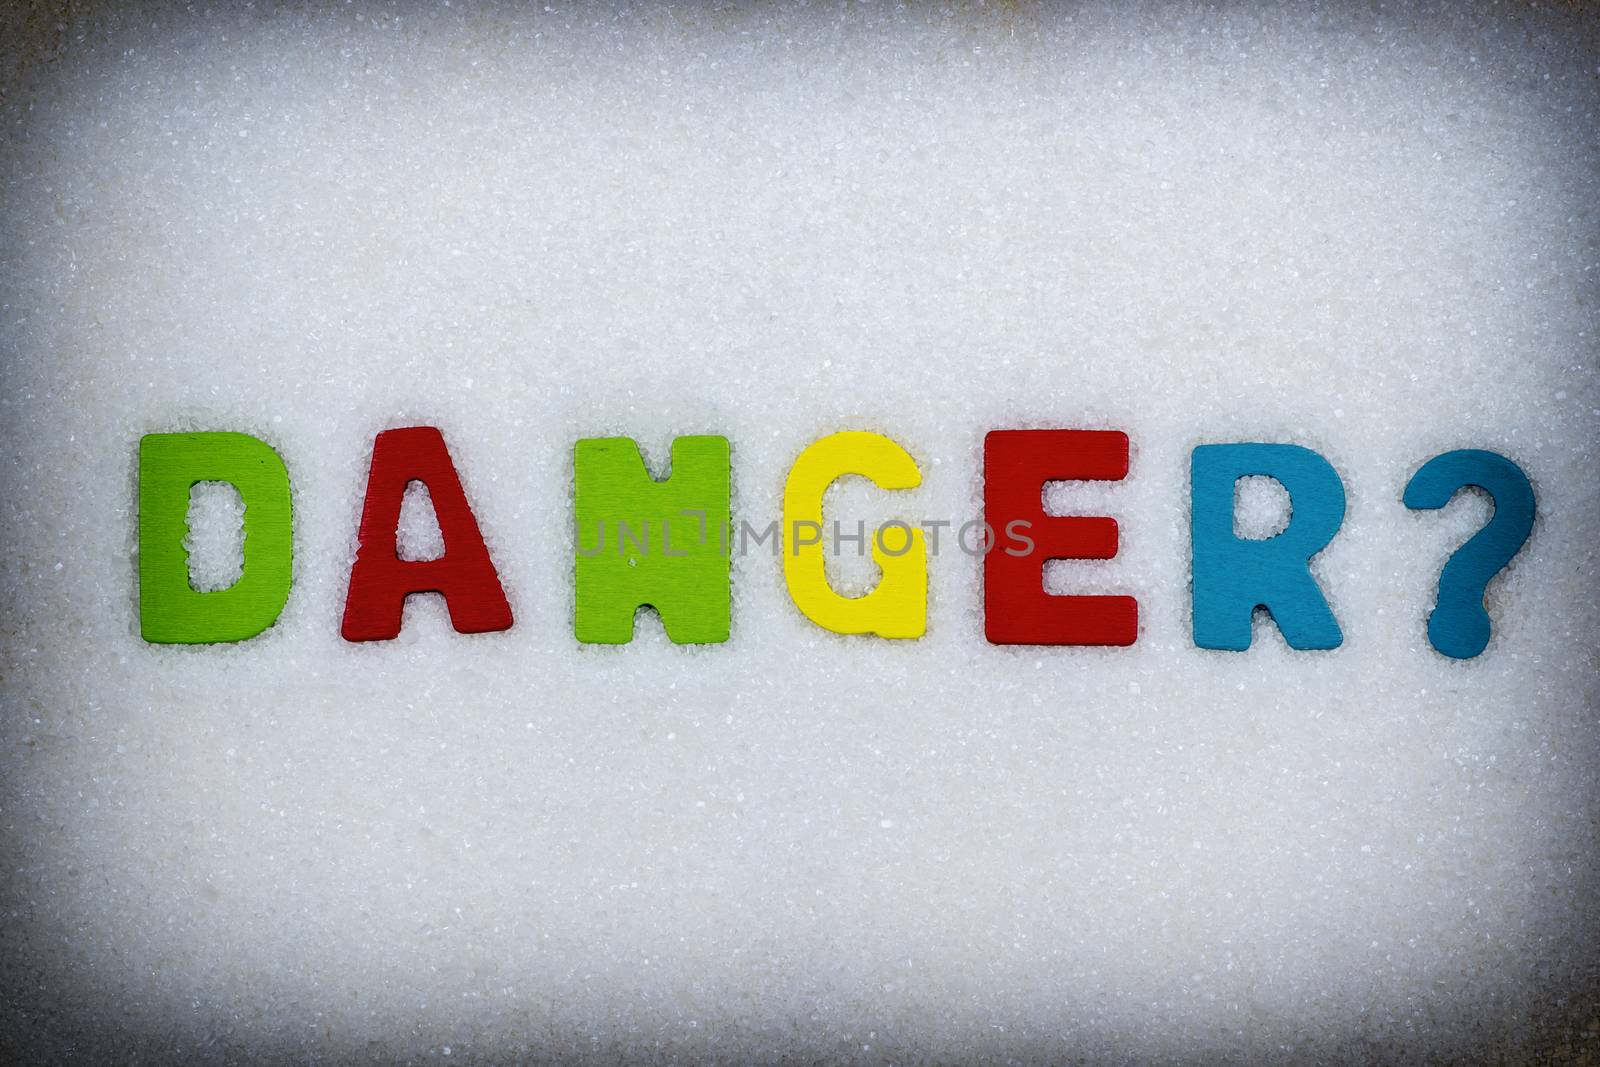 "Danger?" Colorful text and letters in wood on white sugar crystals background and black vignette border